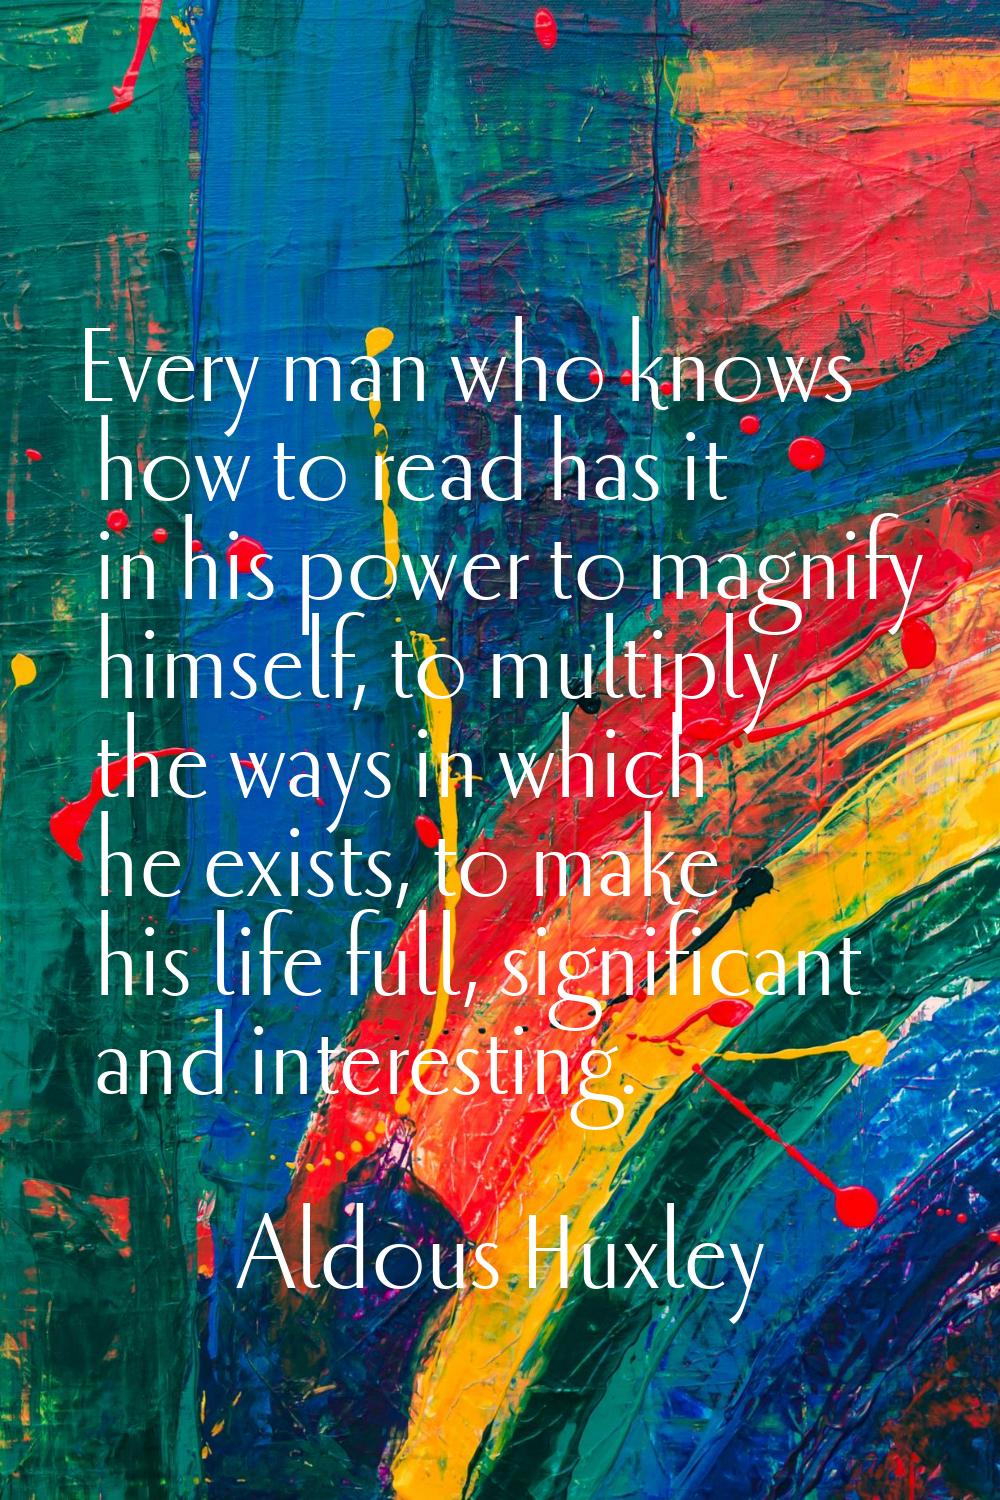 Every man who knows how to read has it in his power to magnify himself, to multiply the ways in whi